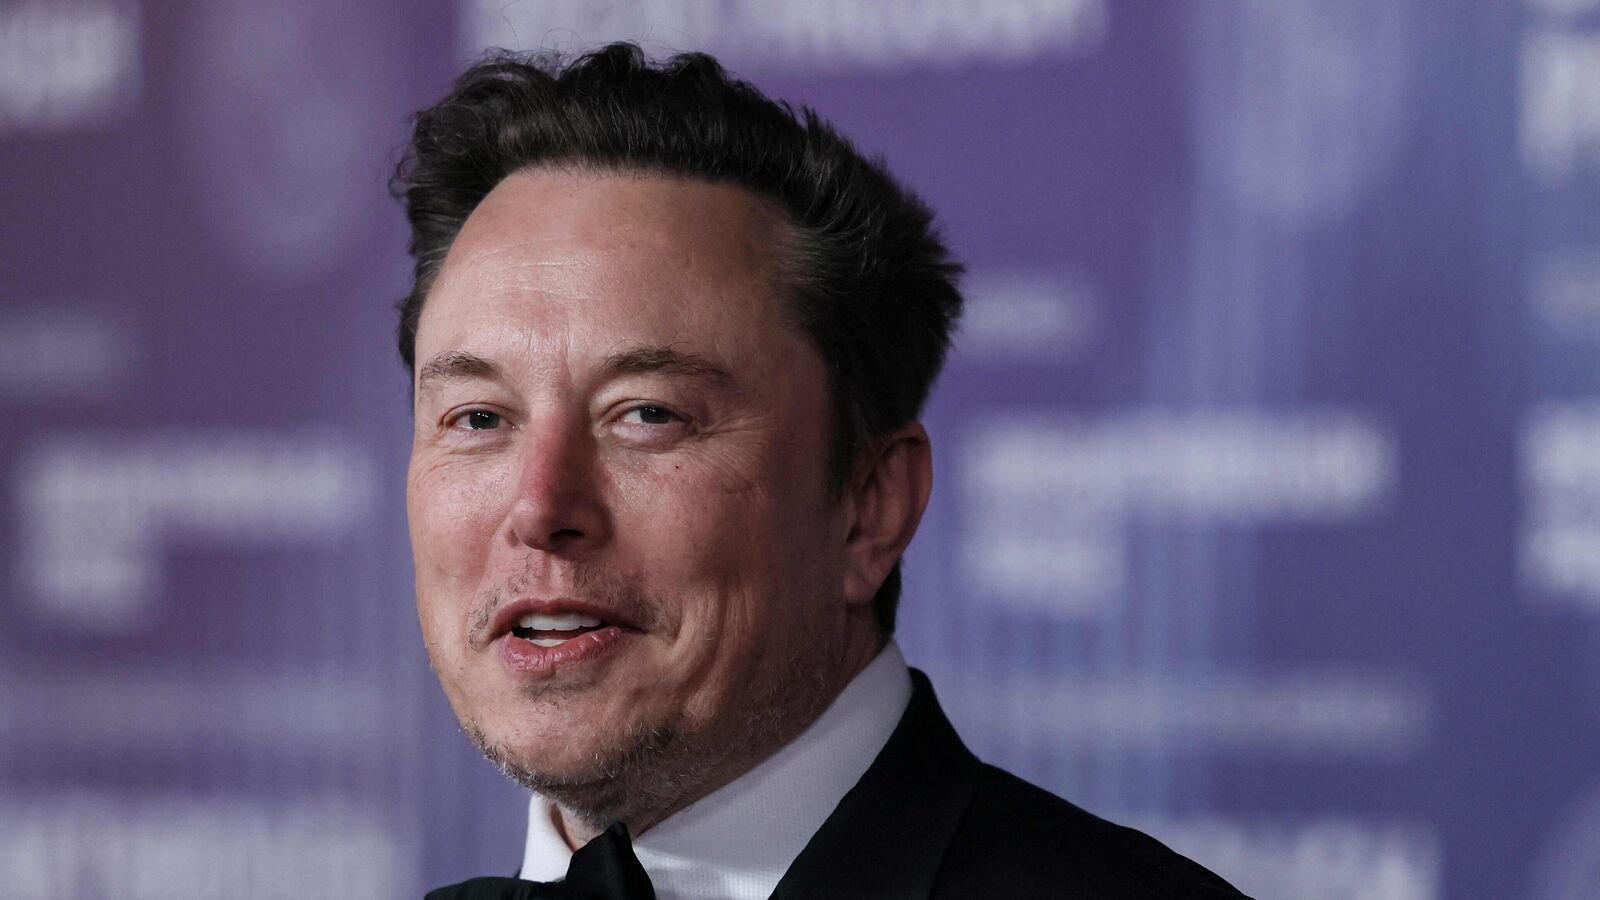 Watch: Elon Musk says he’s a ‘big fan of China’ as Tesla CEO goes for surprise Beijing visit after cancelling India trip